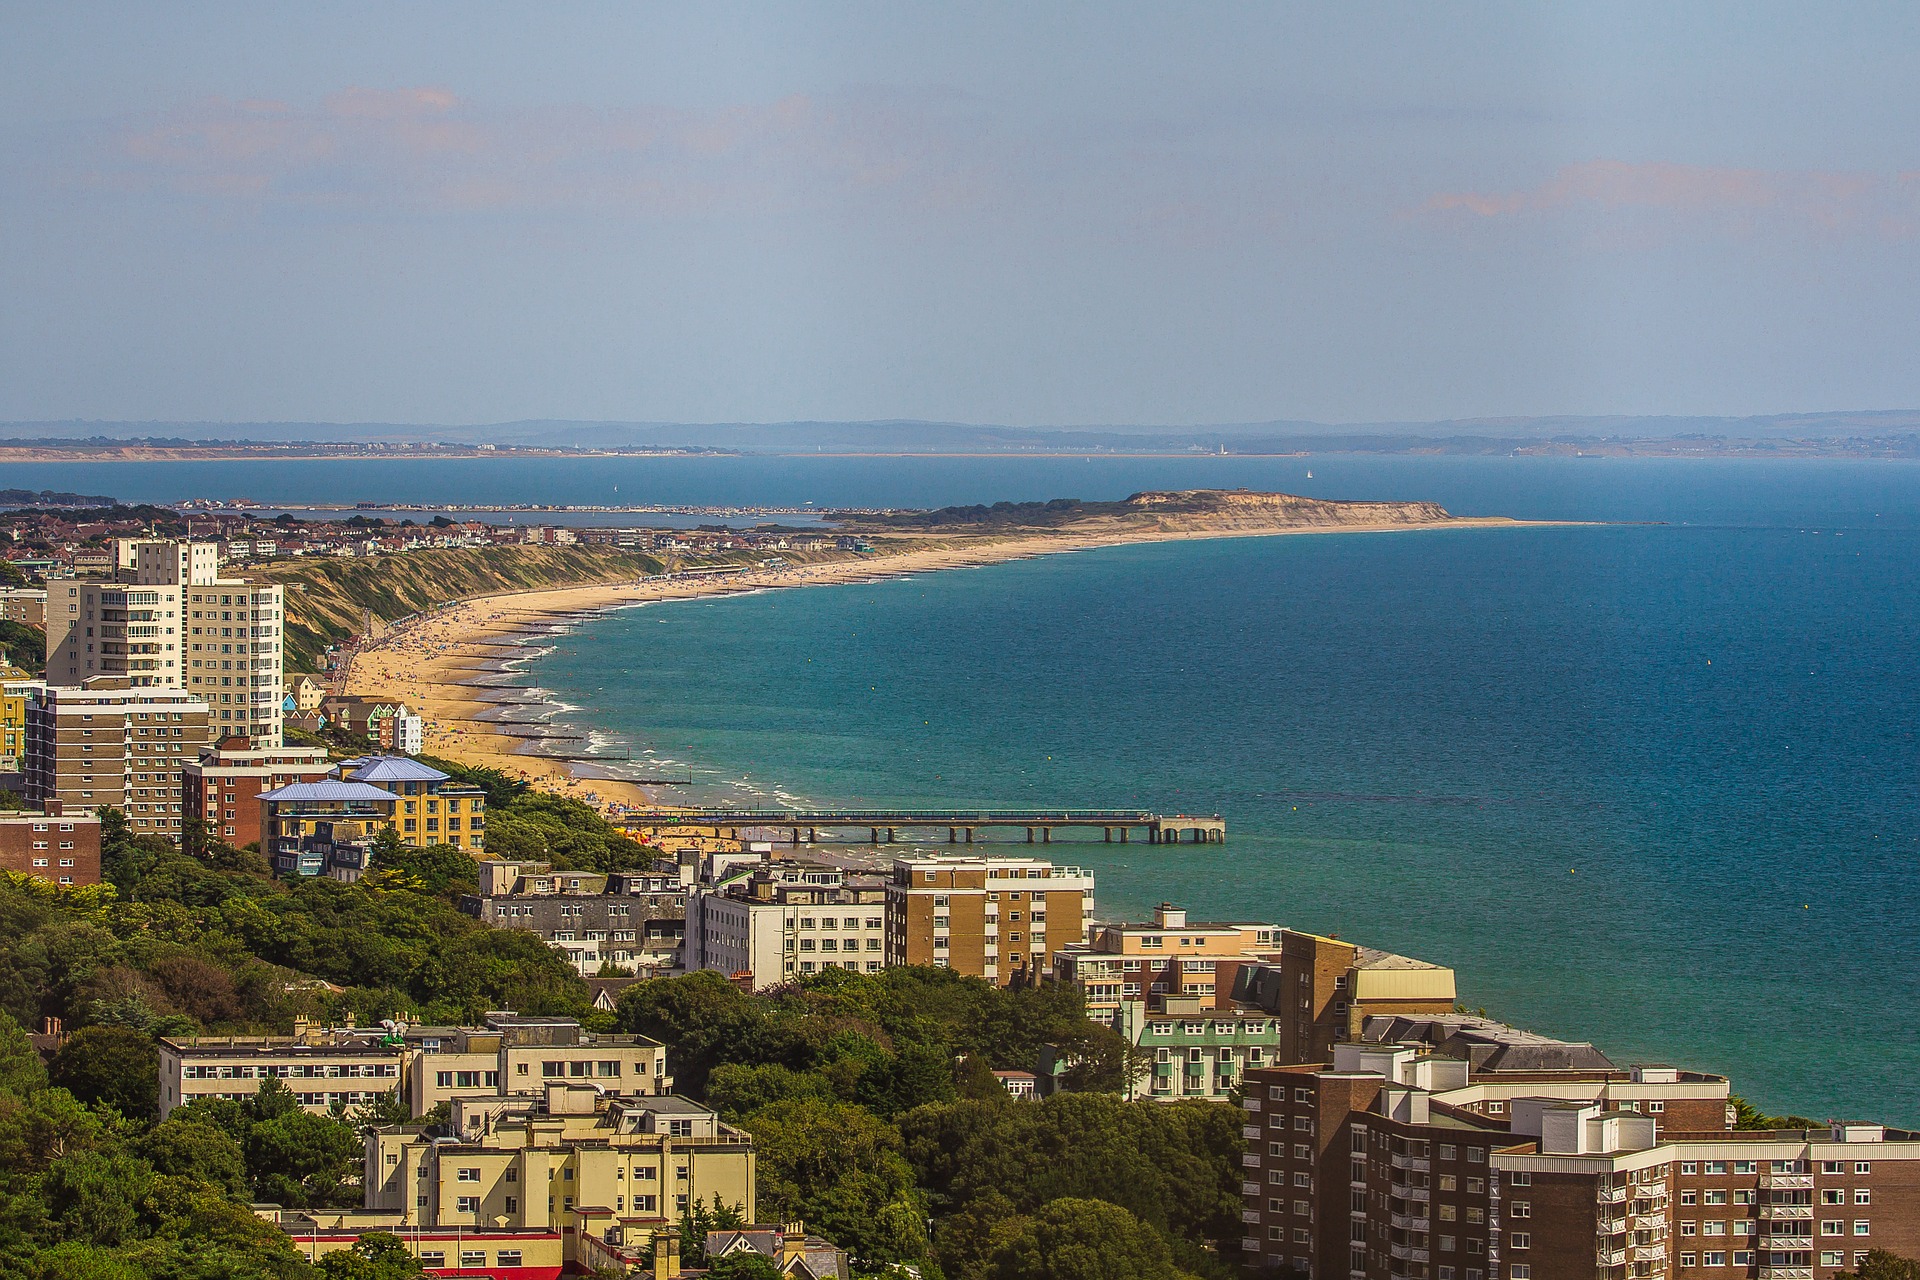 Bournmouth coastline from a high vantage point, looking east towards Boscombe pier.